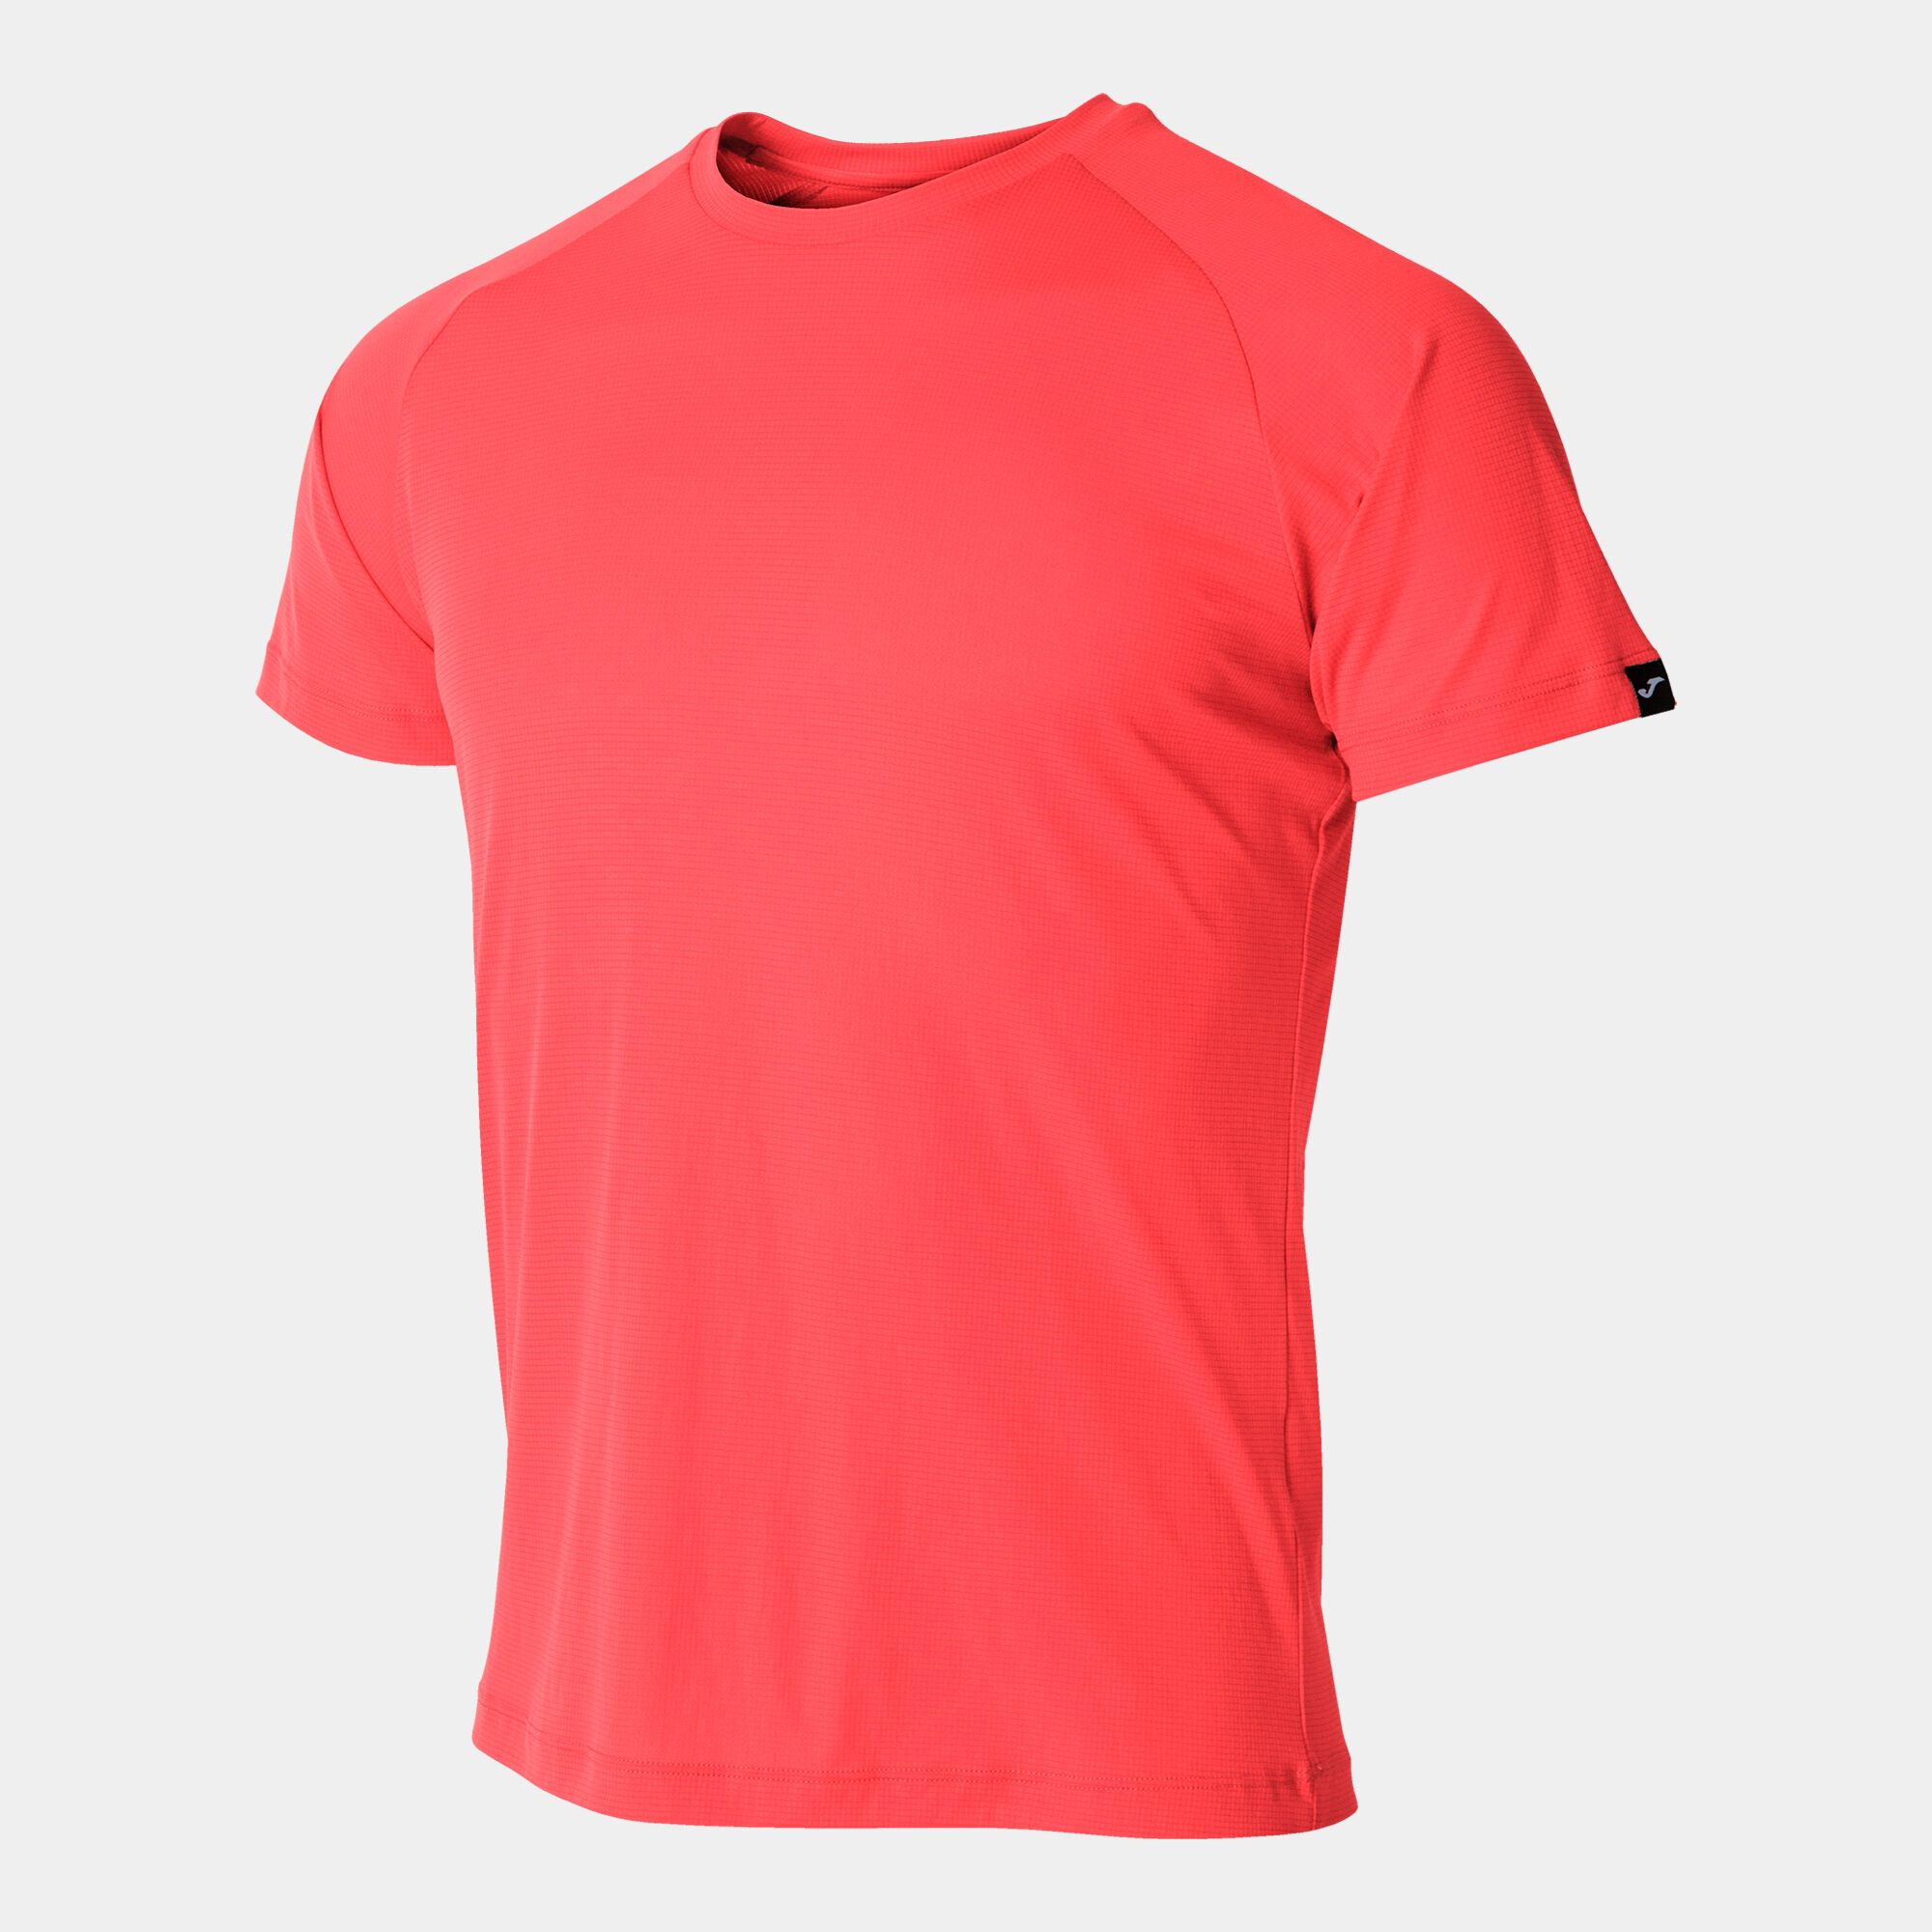 Maillot manches courtes homme R-Combi corail fluo